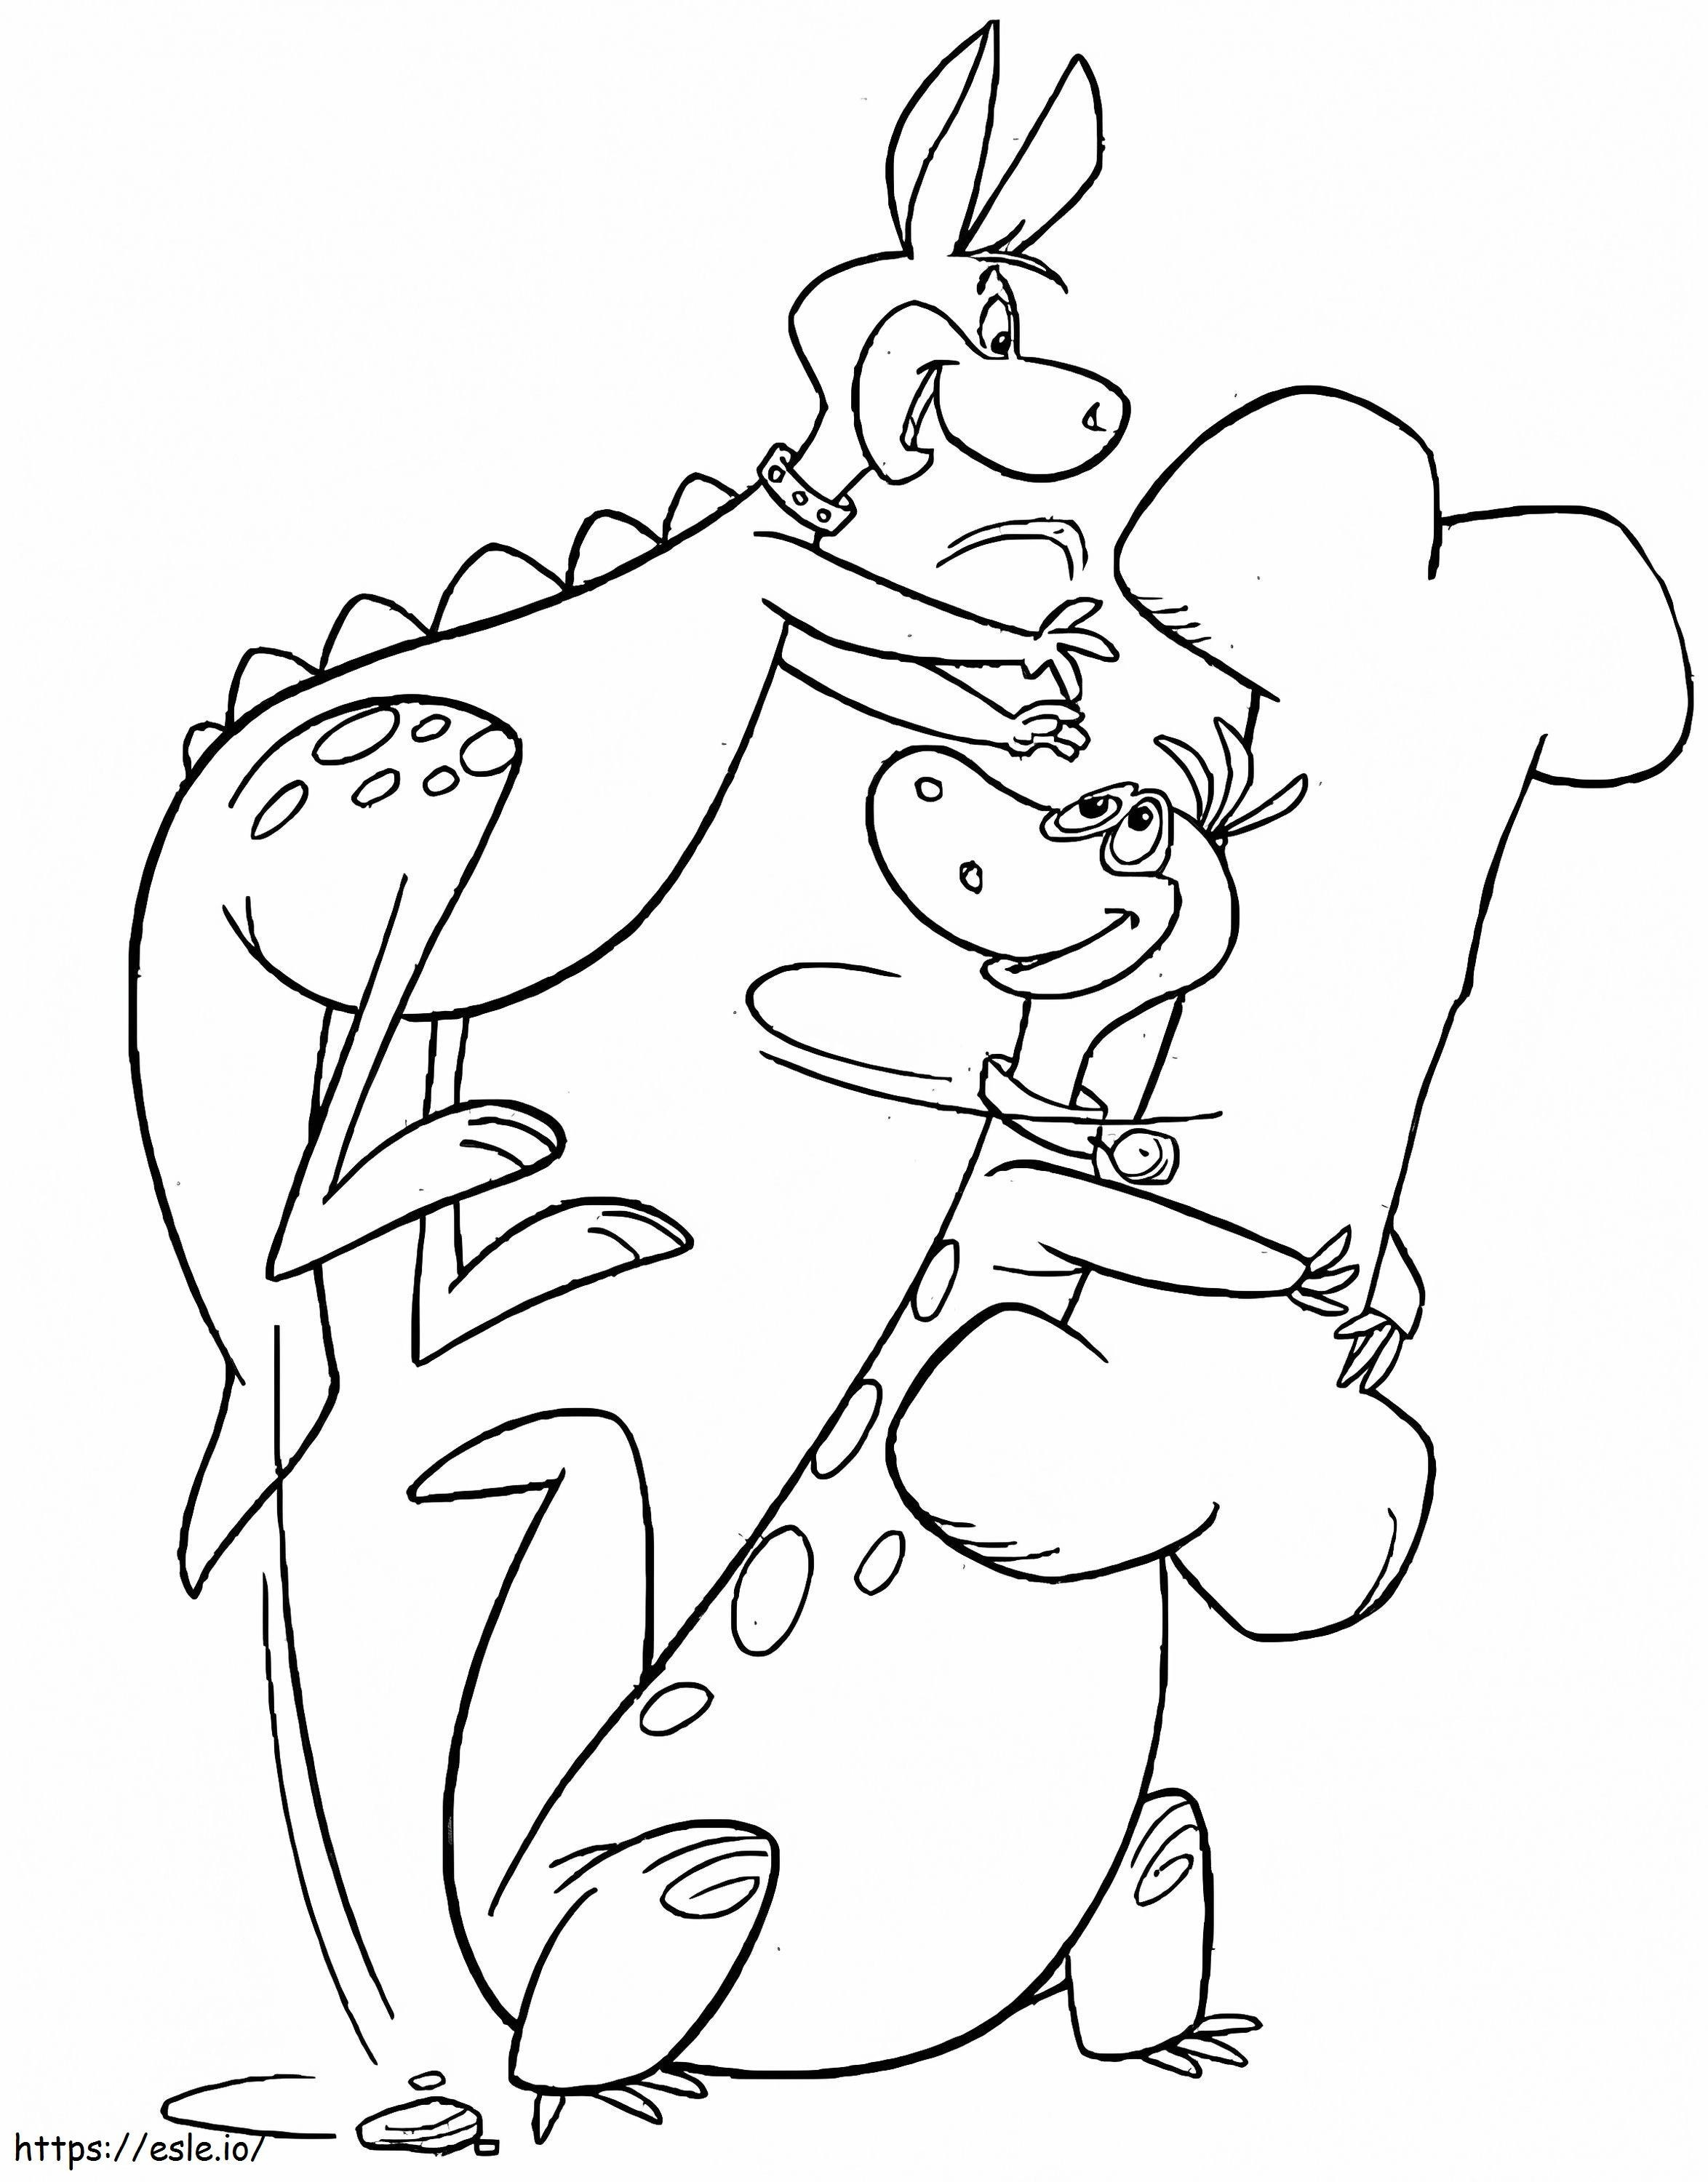 Hoppy And Dino From The Flintstones coloring page